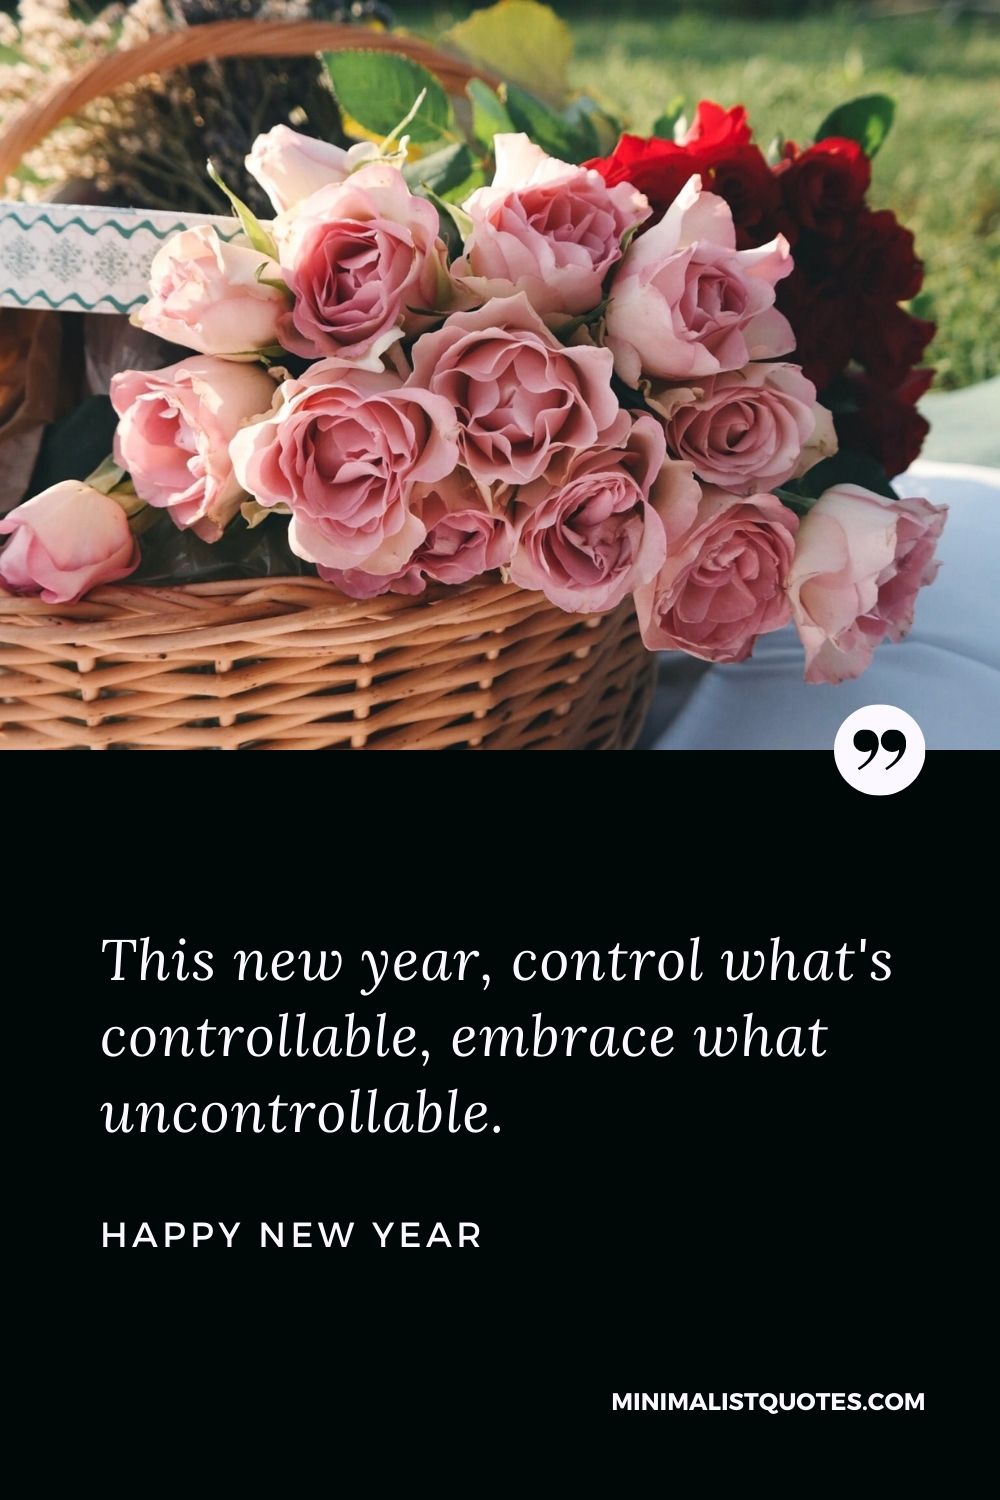 New Year Wish - This new year, control what's controllable, embrace what uncontrollable.